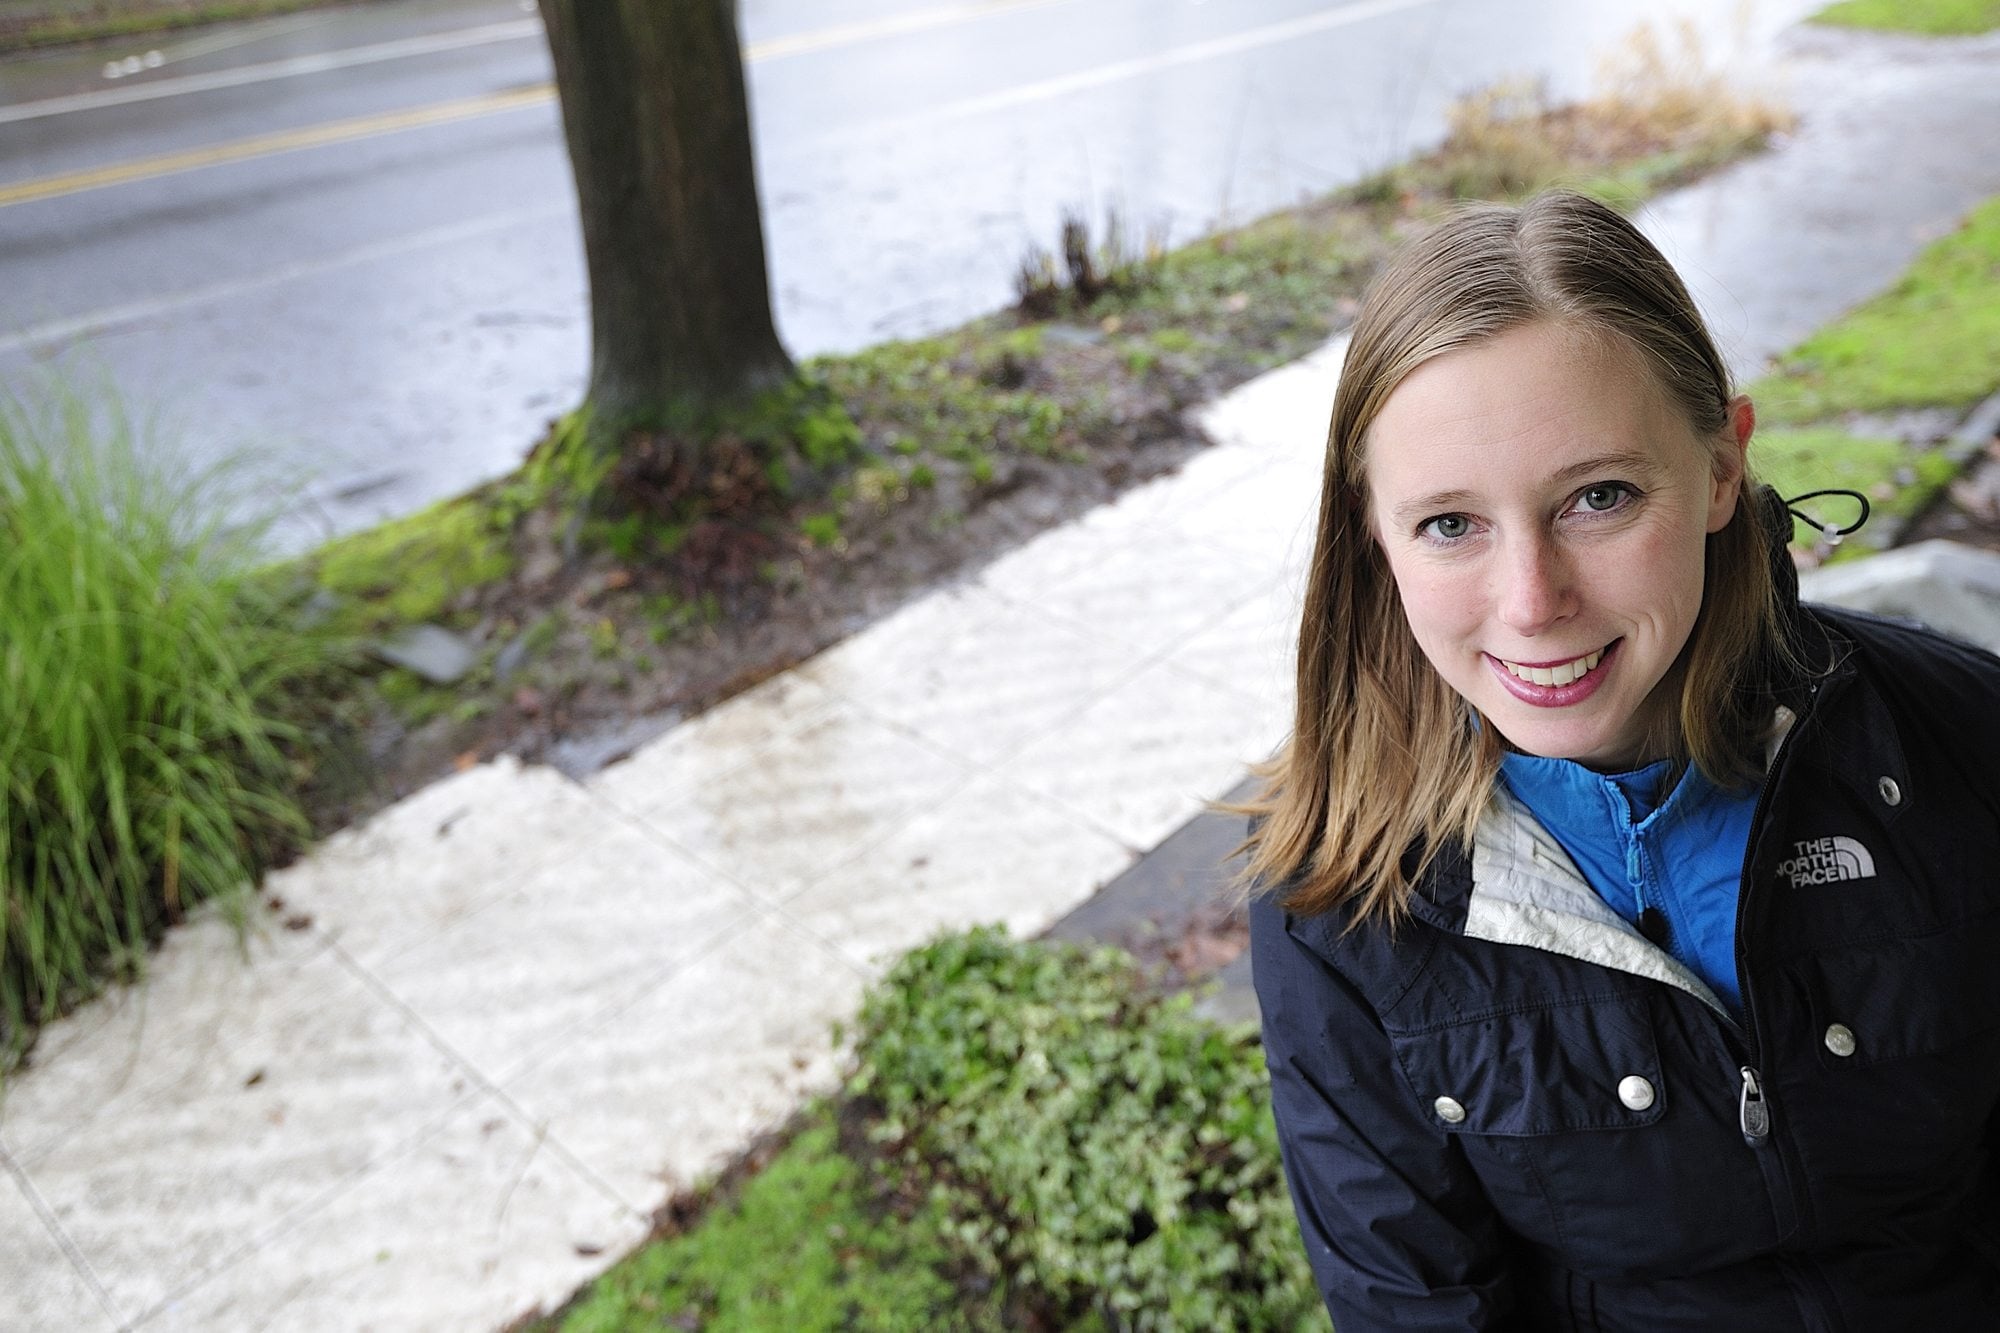 Melissa Tiefenthaler got a grant from the Vancouver Safe Neighborhood Streets Fund to install the city's first rubber sidewalk in the Hough neighborhood. The flexible sidewalk helped save a tree whose roots had upheaved the concrete sidewalk, causing a tripping hazard.